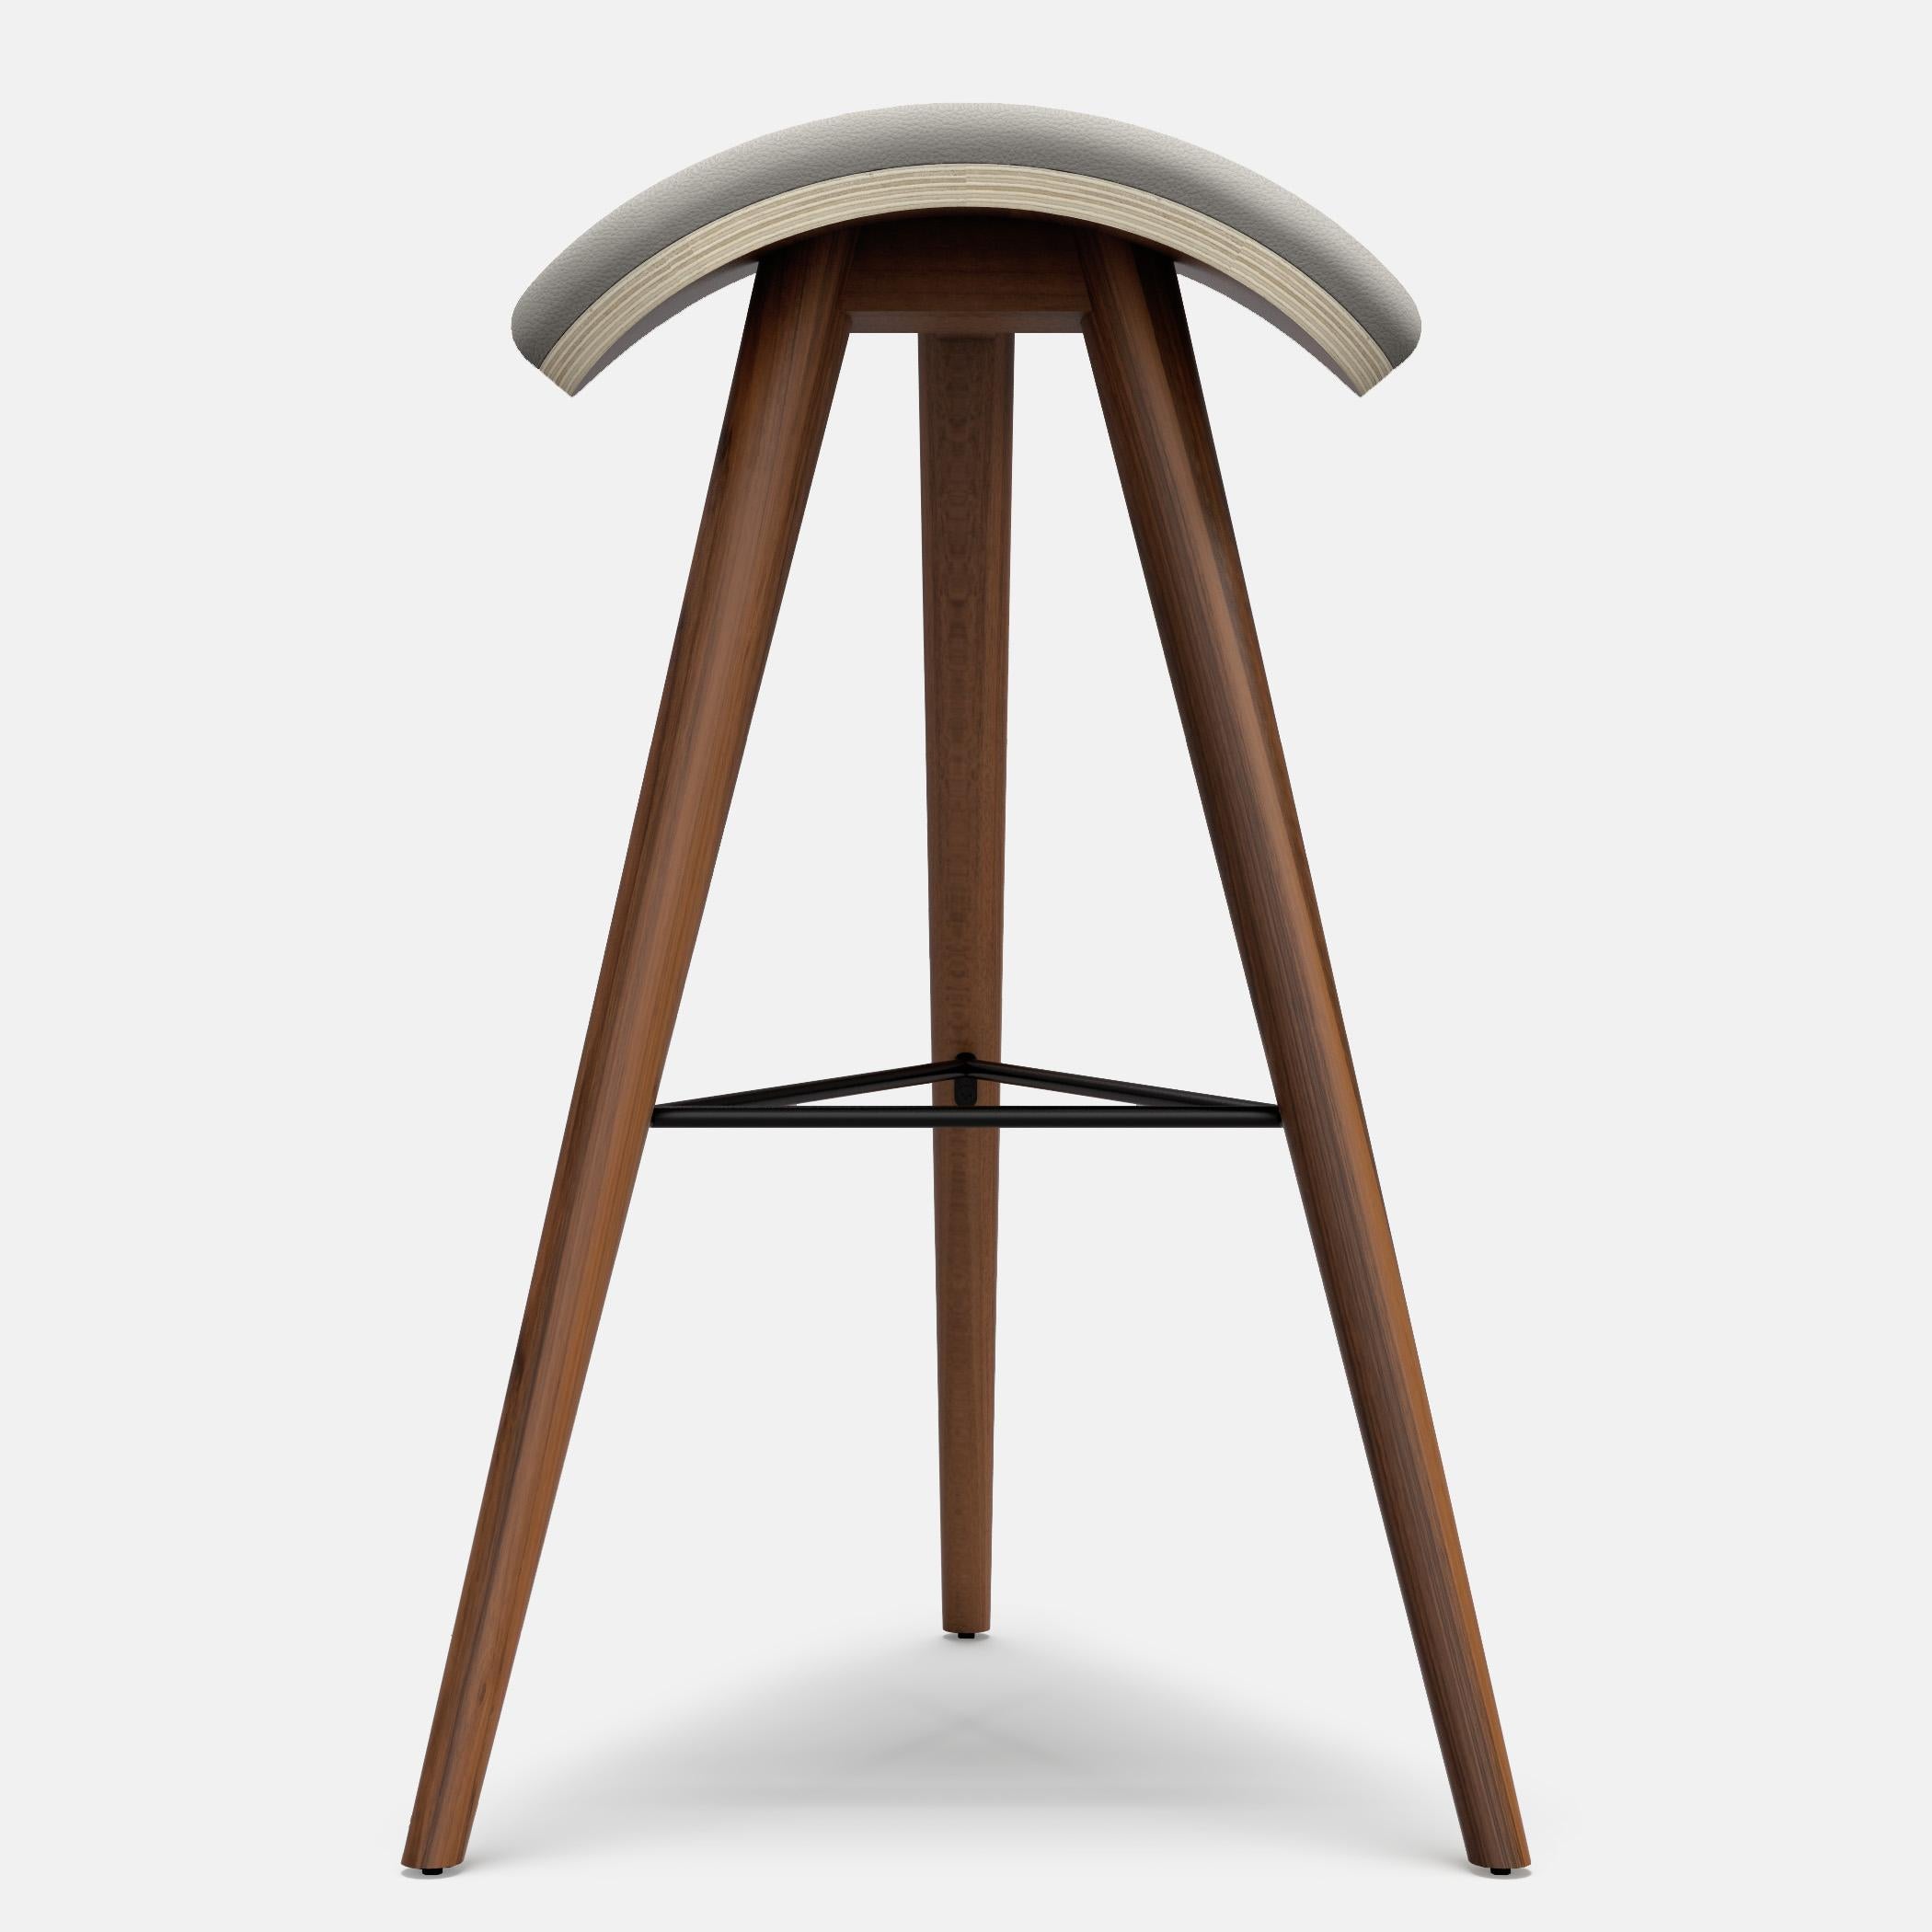 Walnut and fabric horse high stool by Alexandre Caldas
Dimensions: W 50 x D 55 x H 79 cm
Materials: Walnut, fabric

Structure also available in beech, ash, oak, mix wood
Seat also available in fabric, leather, corkfabric
 